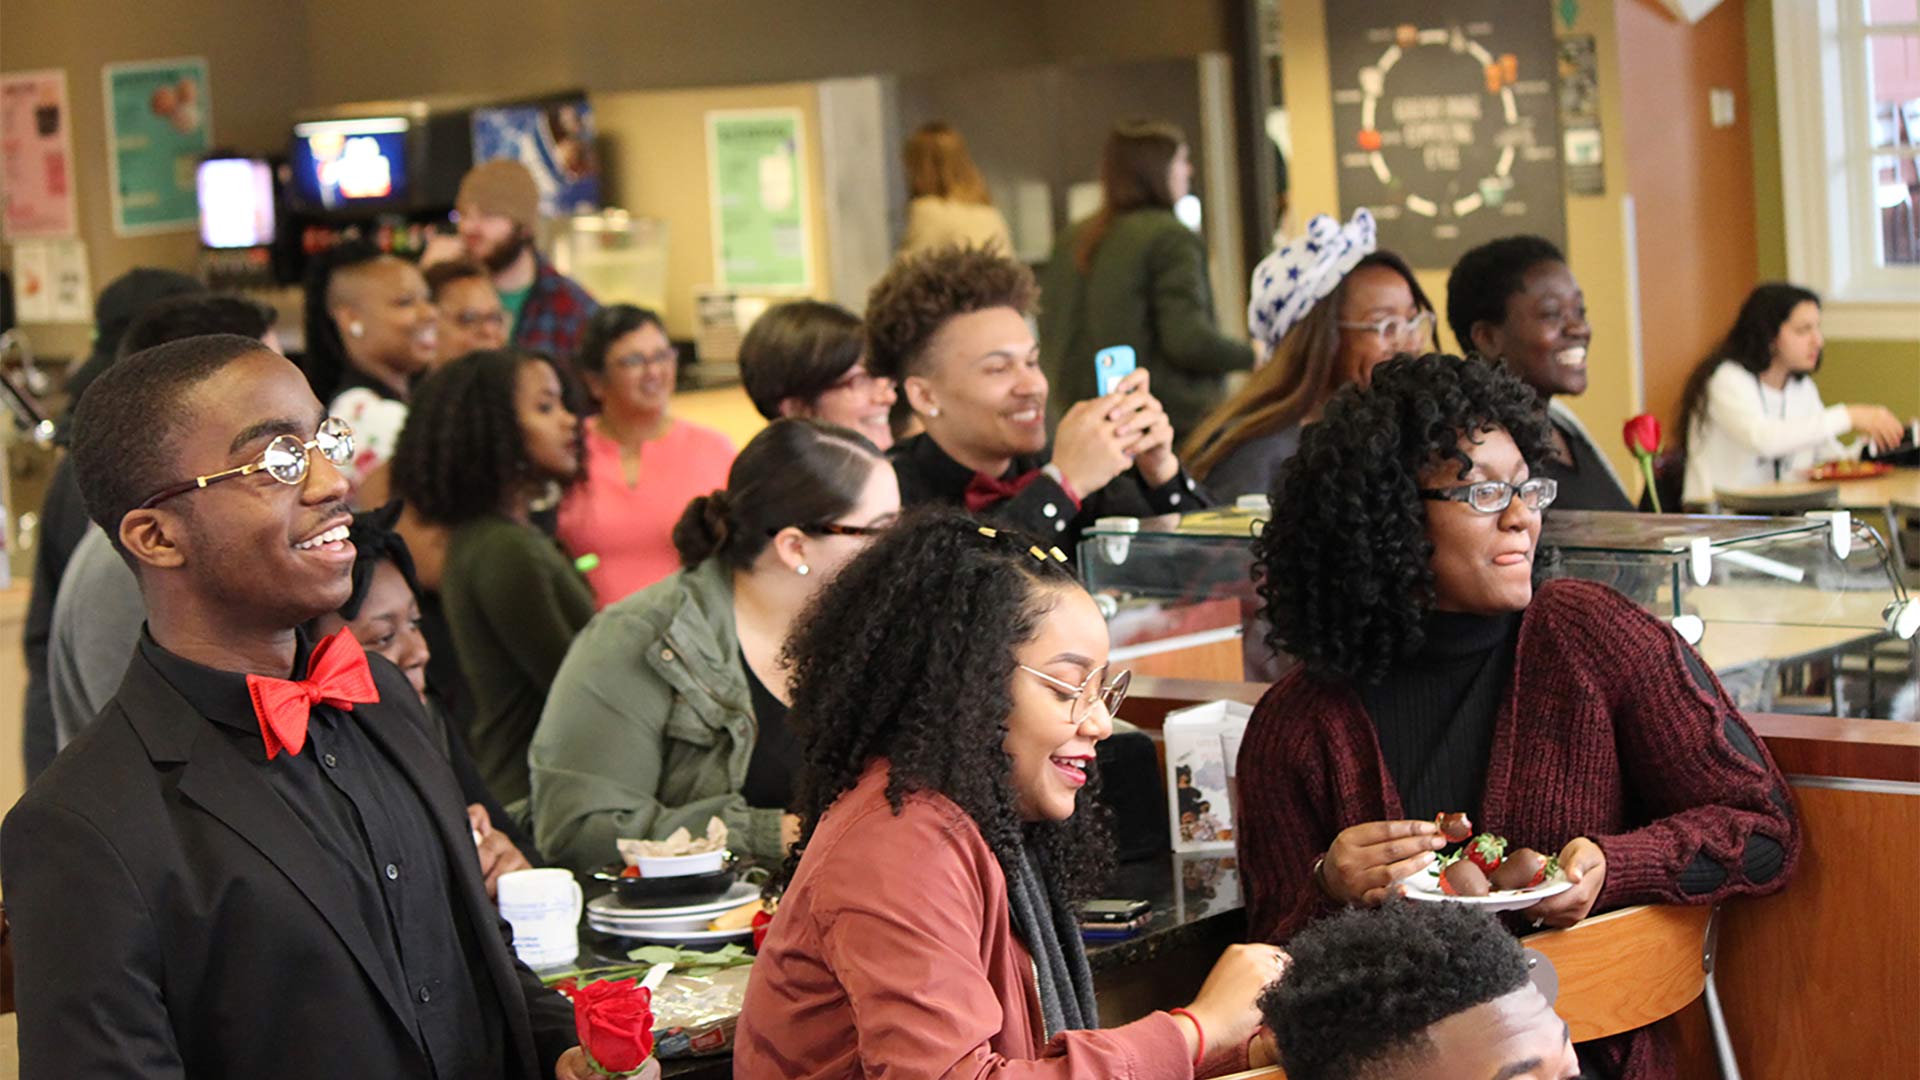 Students watch the rap battle in the dining hall.